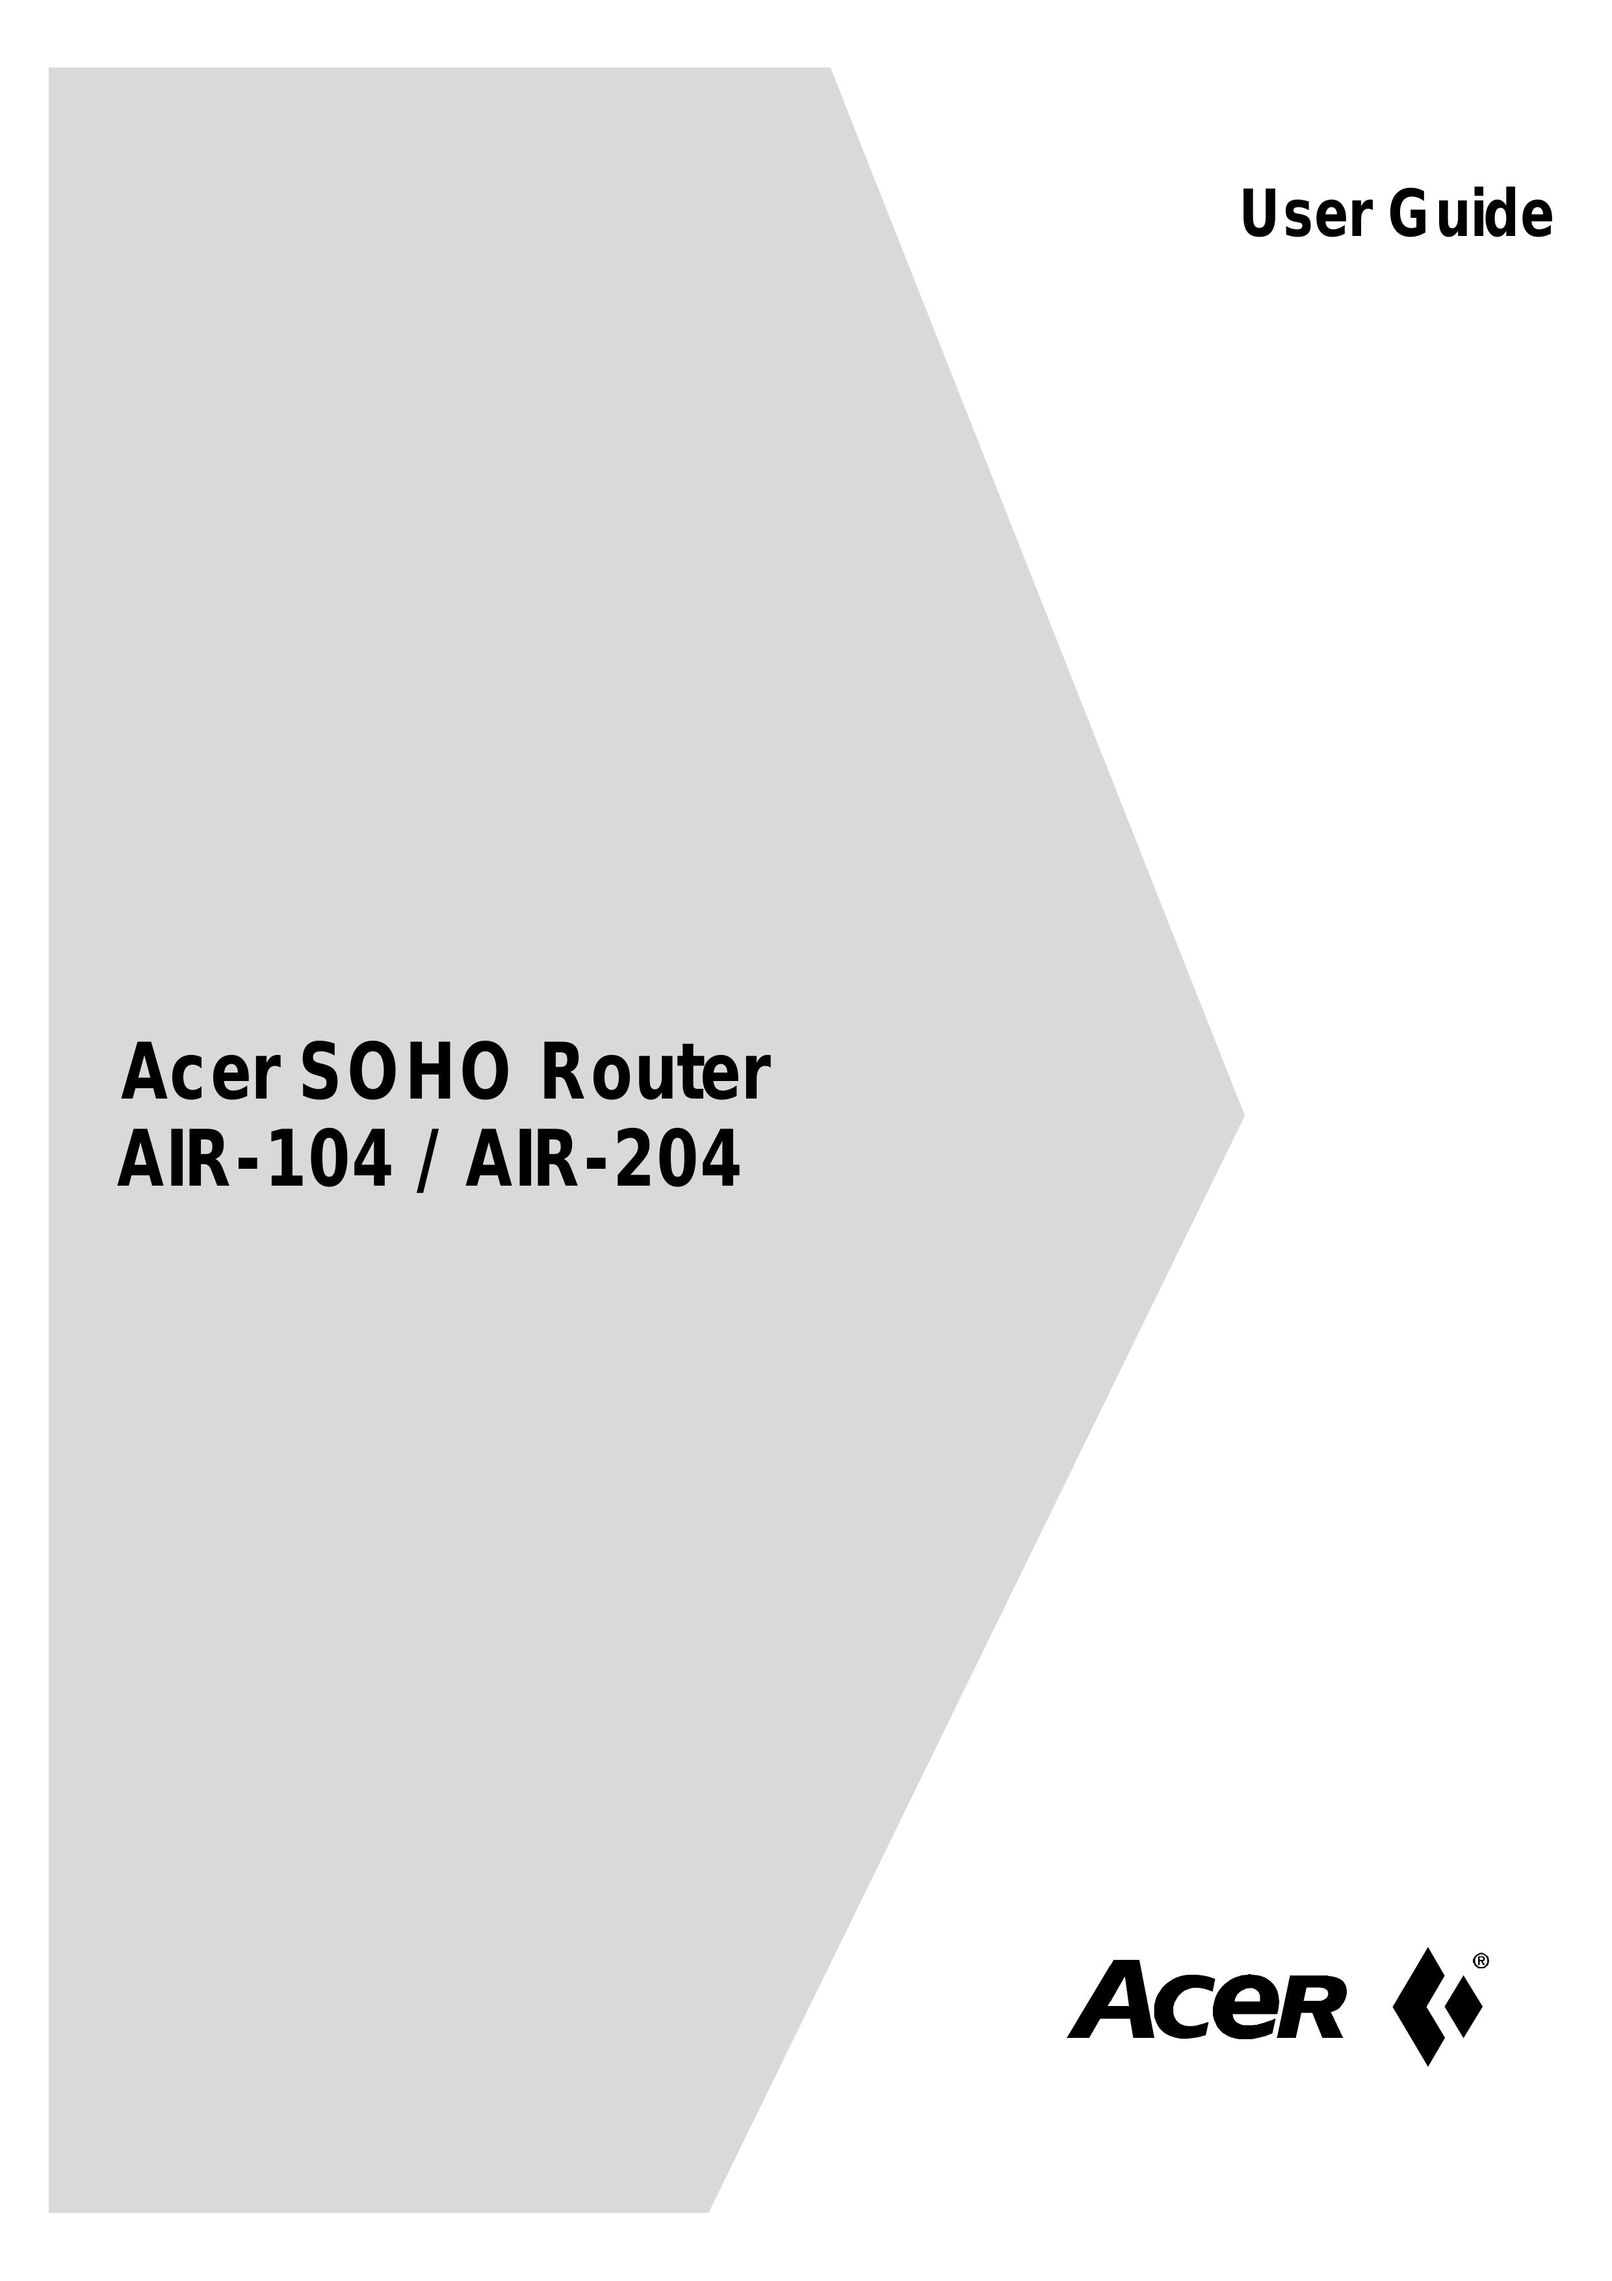 Acer AIR-204 Network Router User Manual